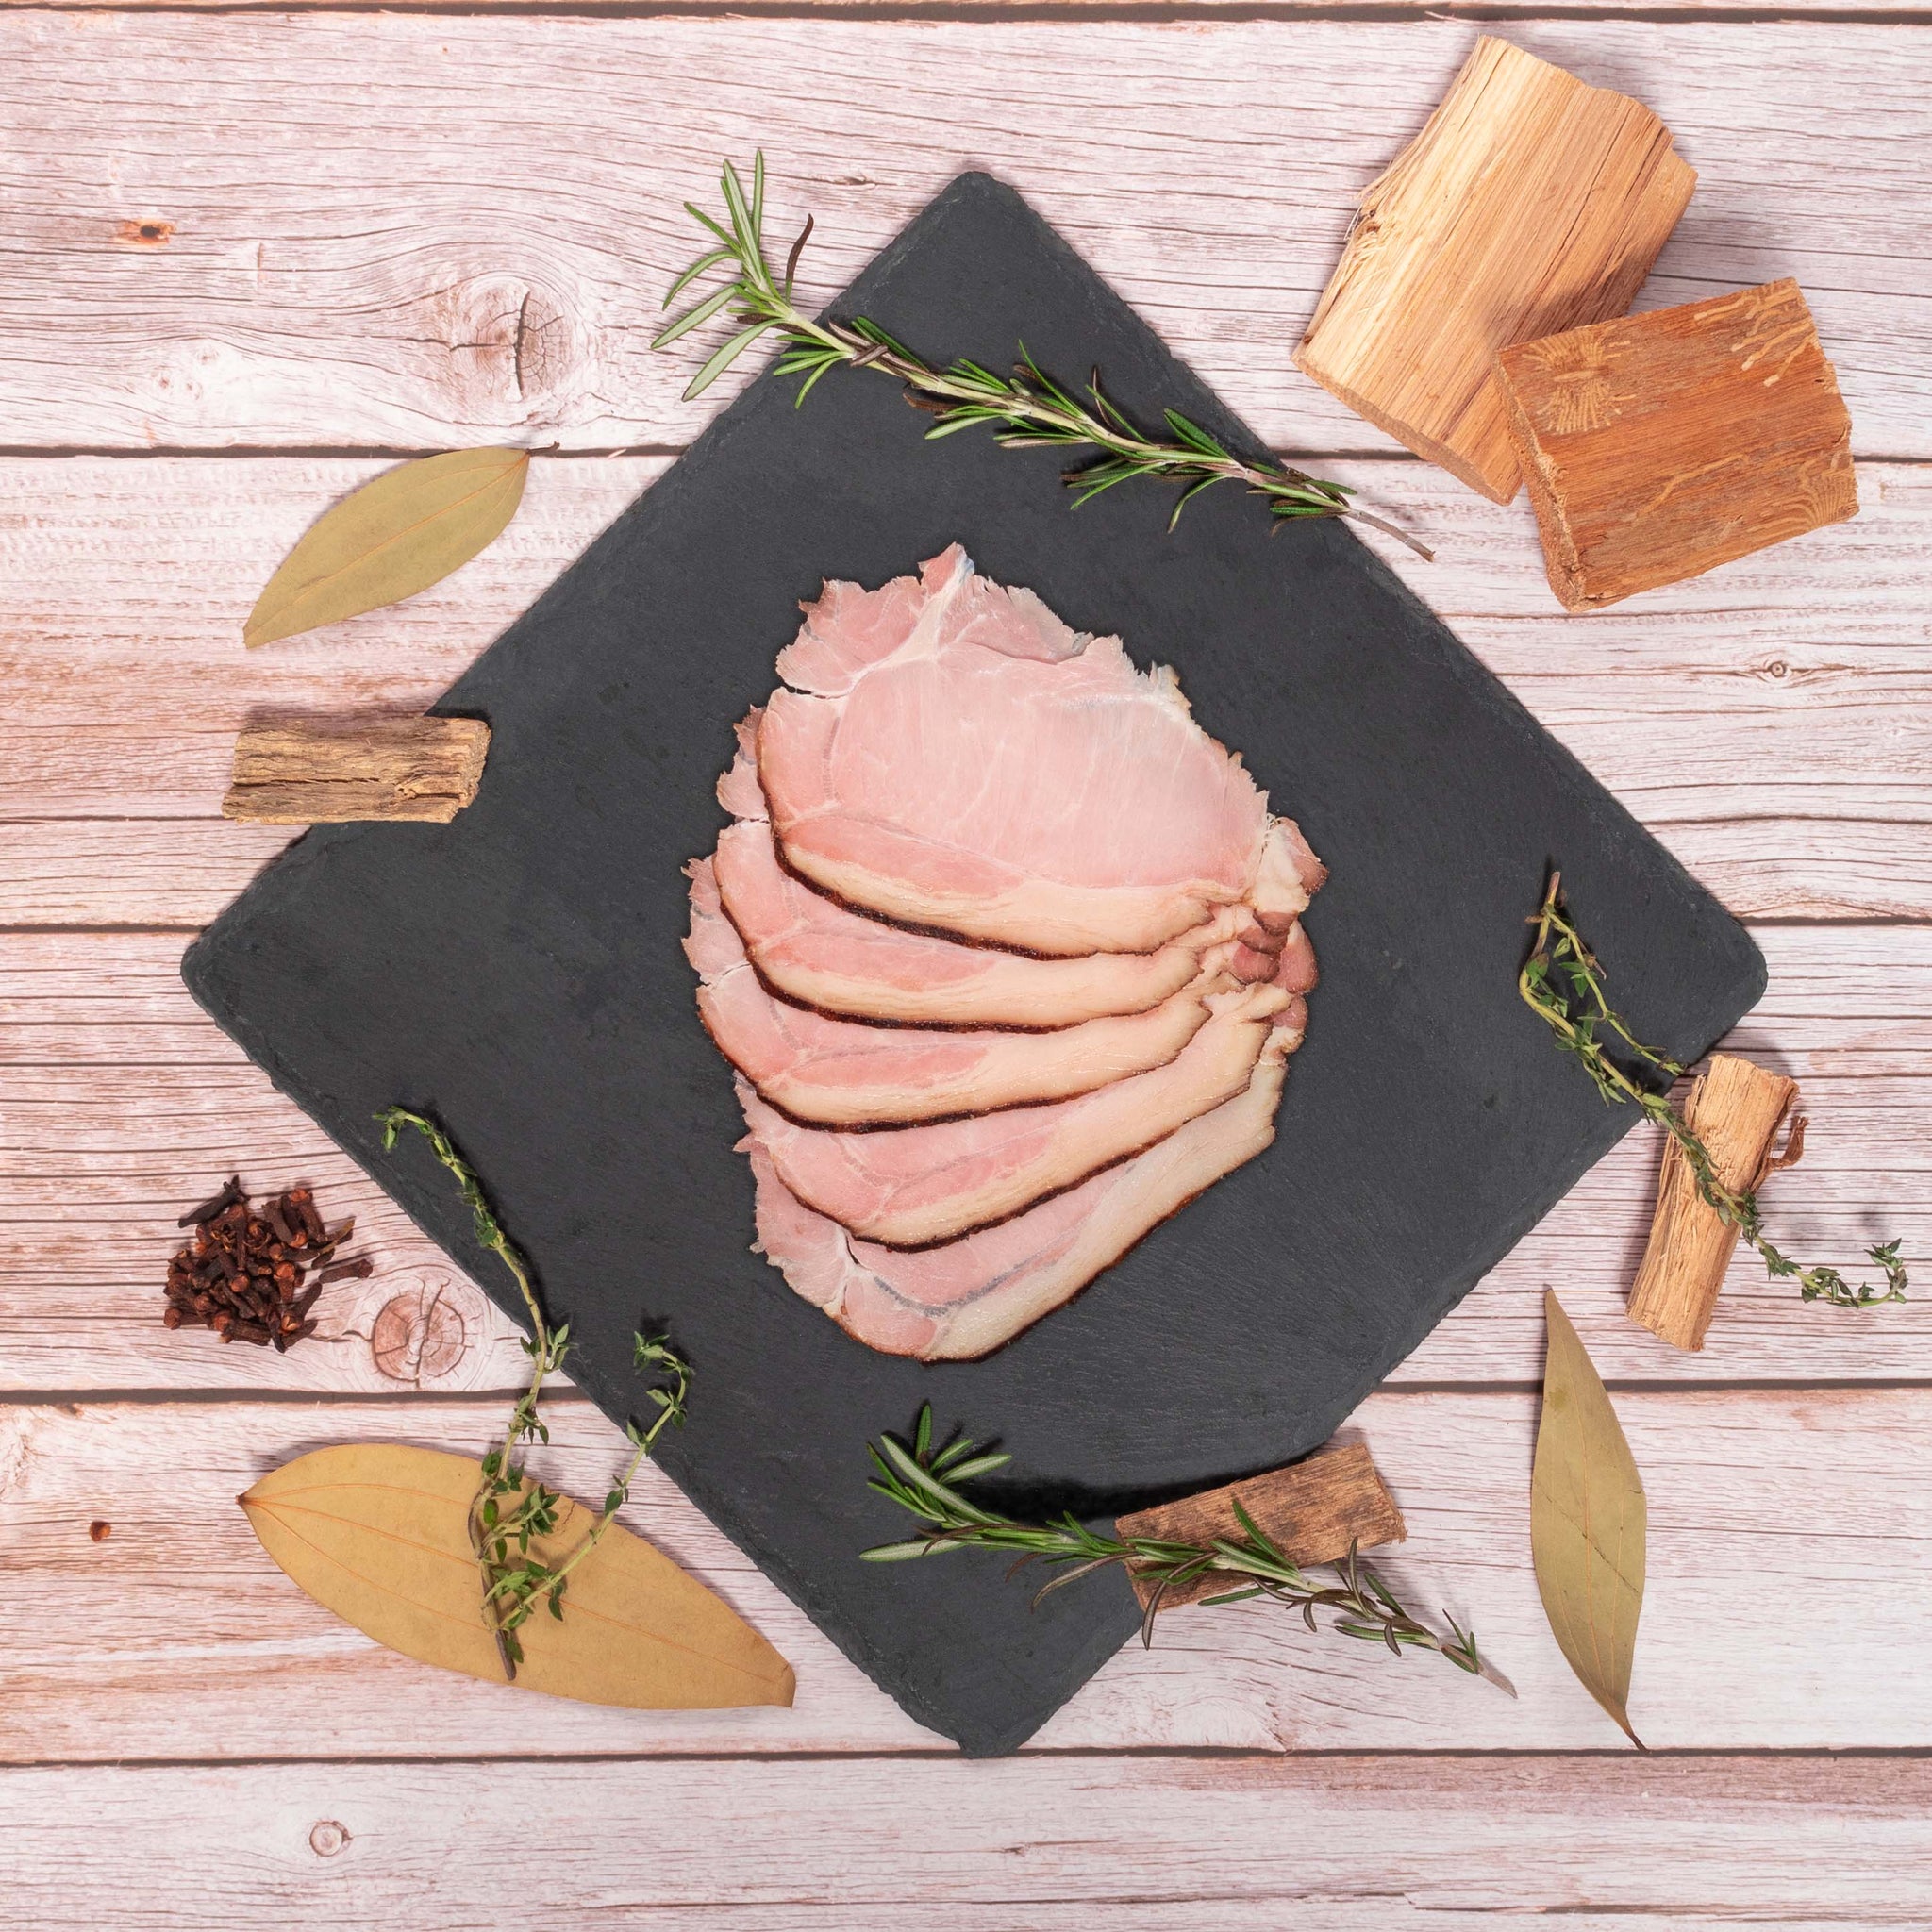 Chestnut-fed Smoked Ham on Stone Plate with Bay Leaves, Rosemary, Thyme, Cloves, Applewood chips decorating the side.